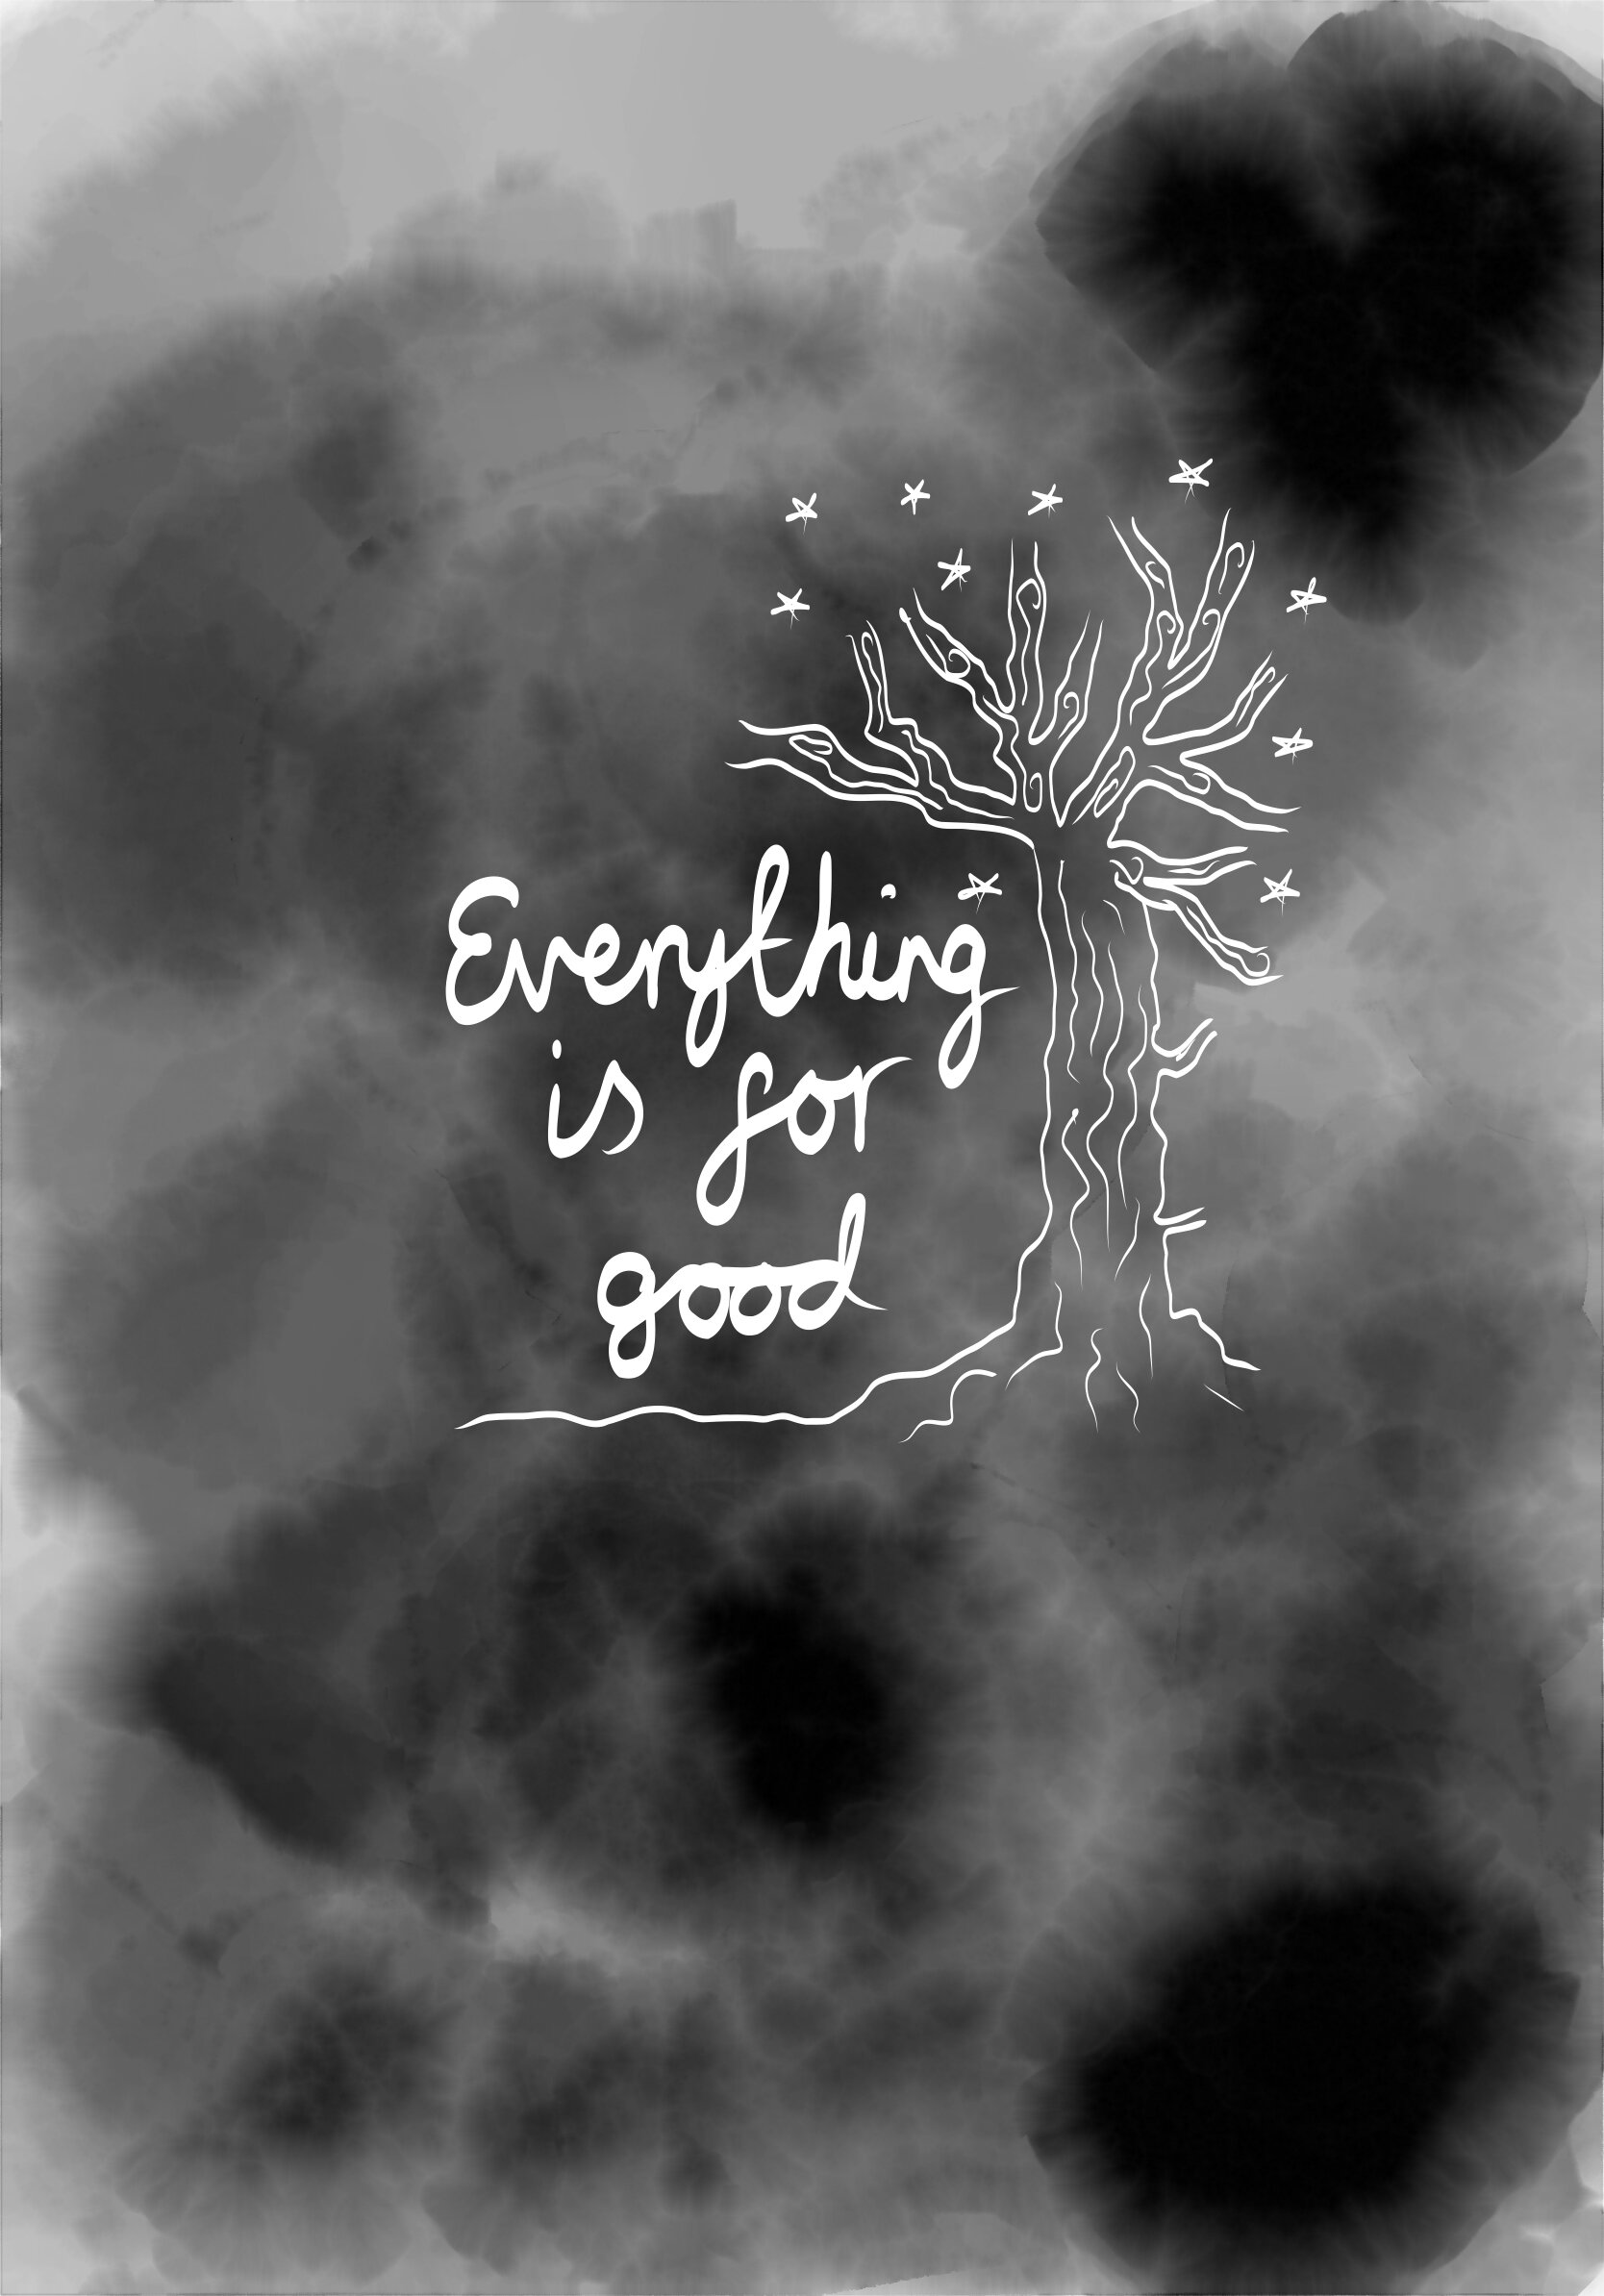 Everything is for Good by Amanuel Setegne